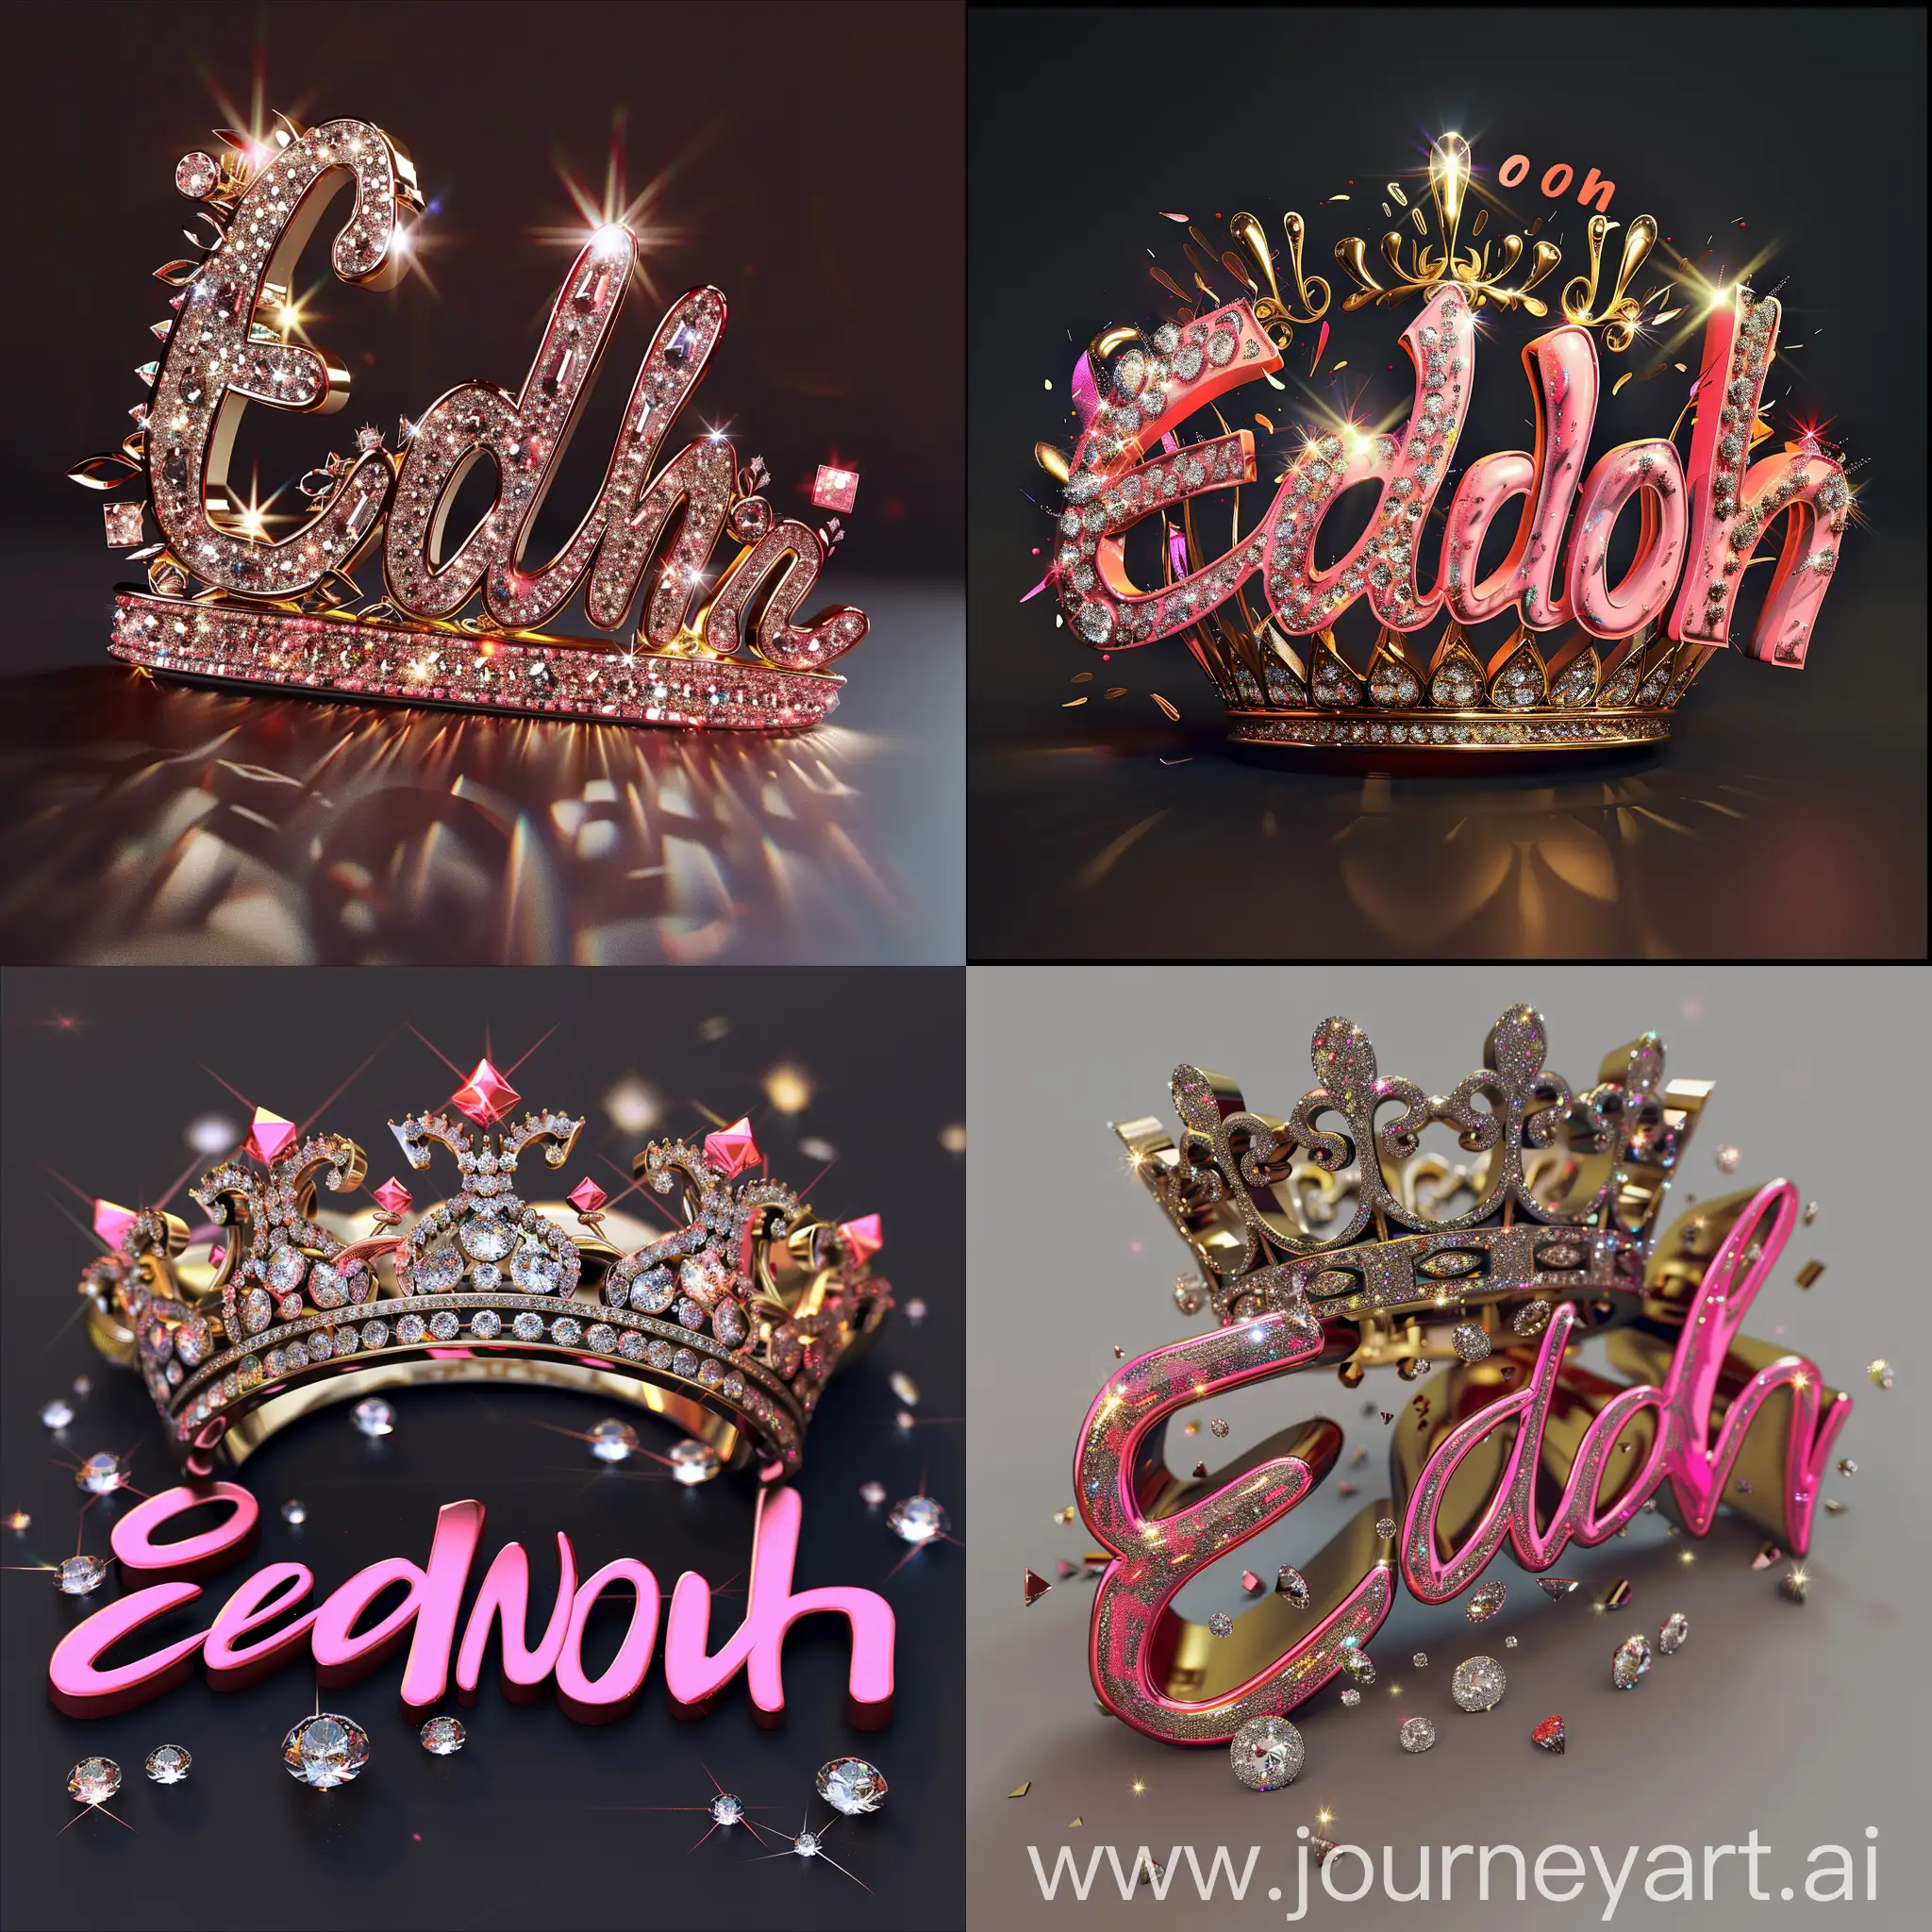 Elegant-3D-Typography-with-Name-Edwoh-and-Crown-adorned-with-Fine-Diamonds-and-Sparkles